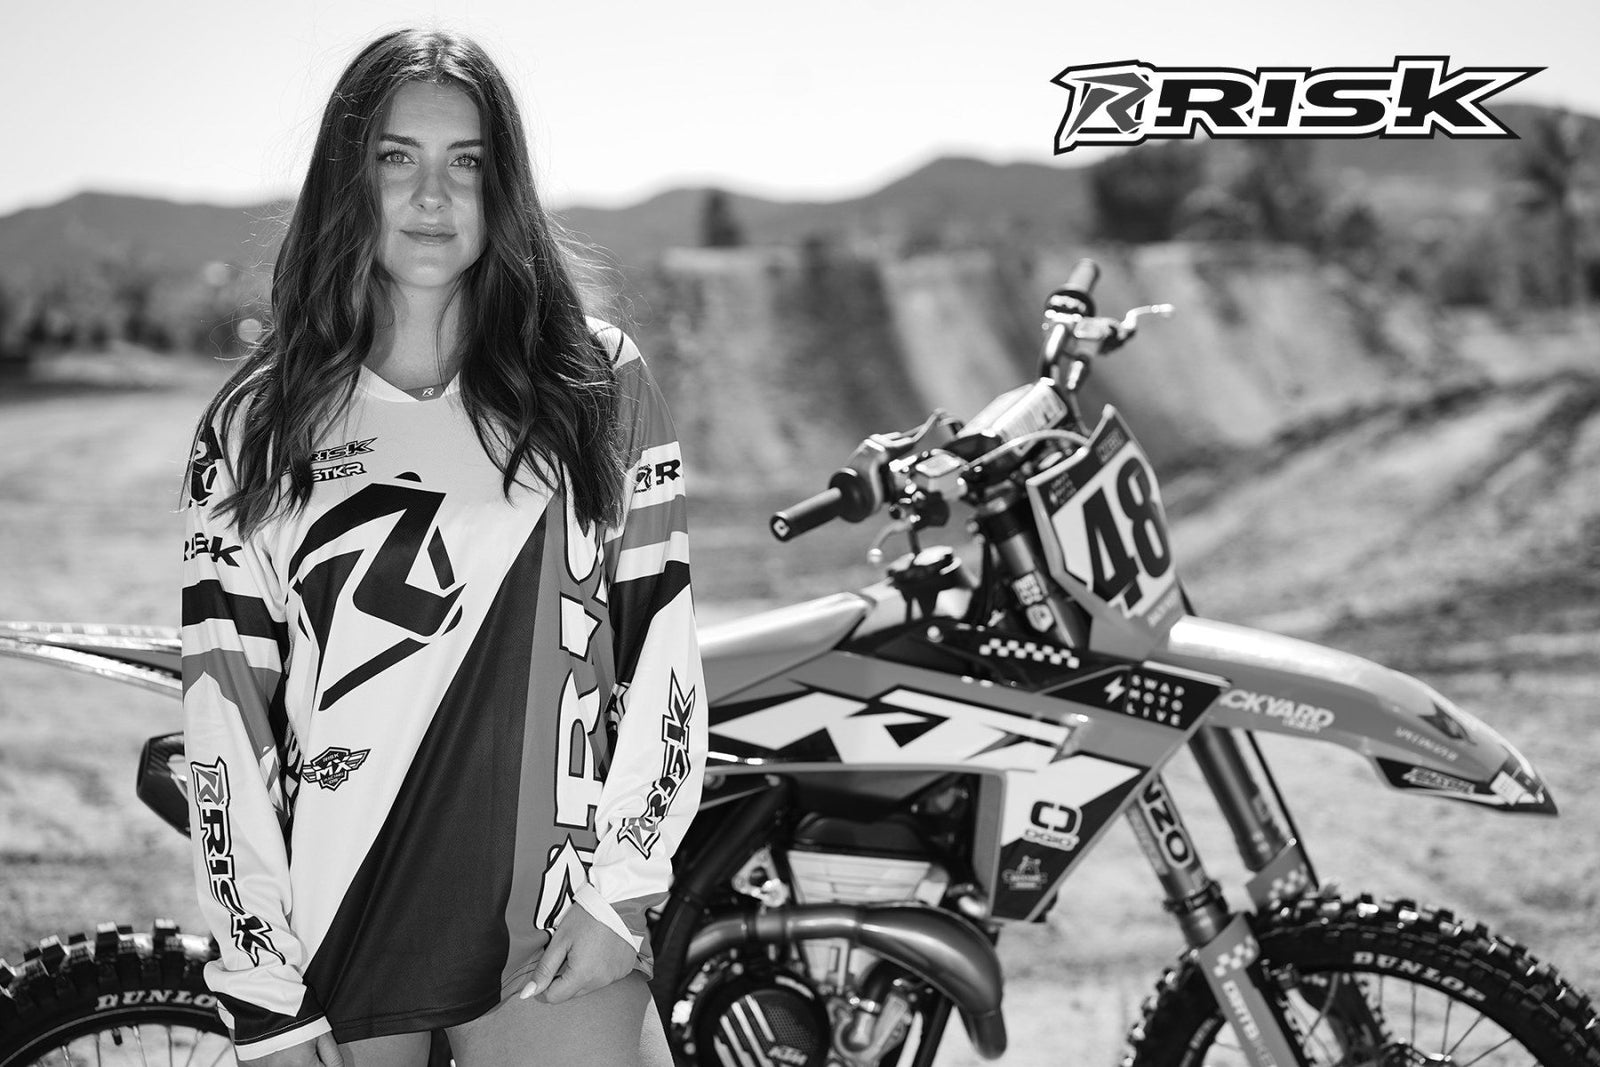 October's Risk Racing Moto Model Dani Hamilton posing in various bikinis and Risk Racing Jerseys next to a dirt bike that's sitting on a Risk Racing ATS stand - Pose #12